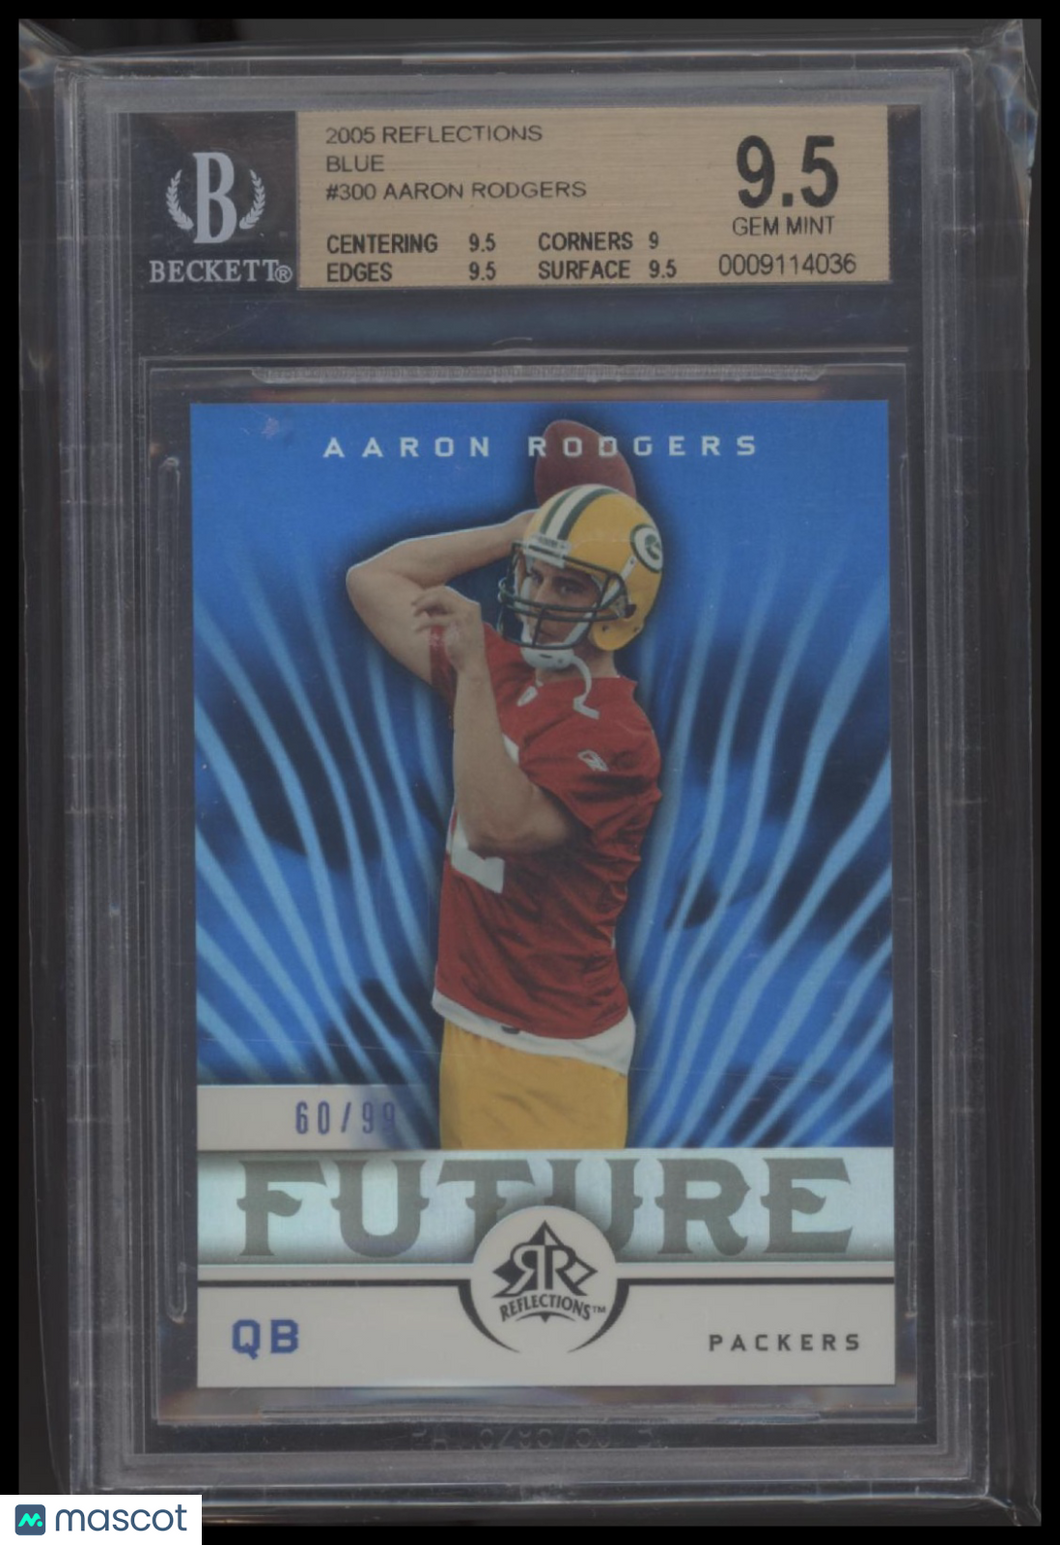 Aaron Rodgers 2005 Reflections Blue #300 /99 BGS 9.5